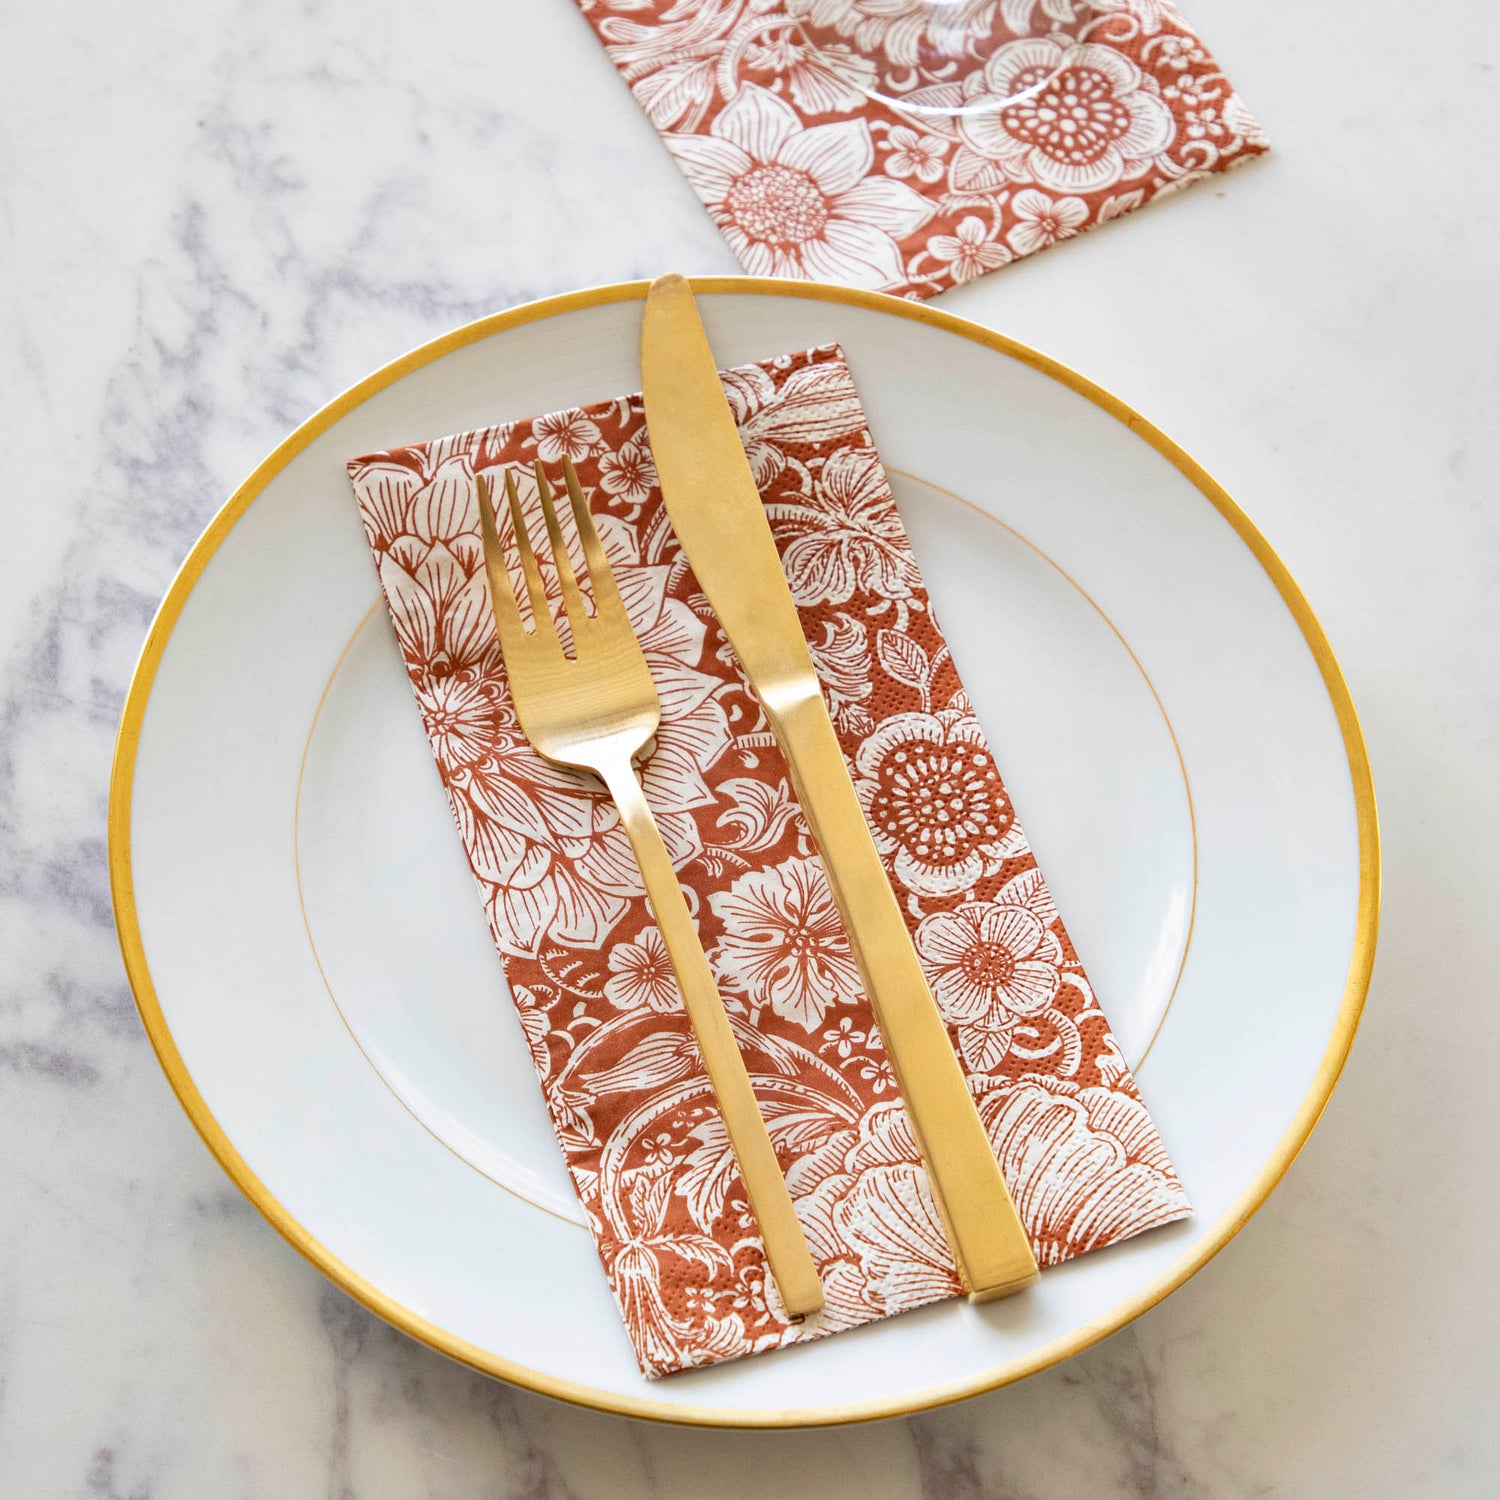 A Harvest Bouquet Guest Napkin centered on a gold-rimmed white plate with gold cutlery on top.